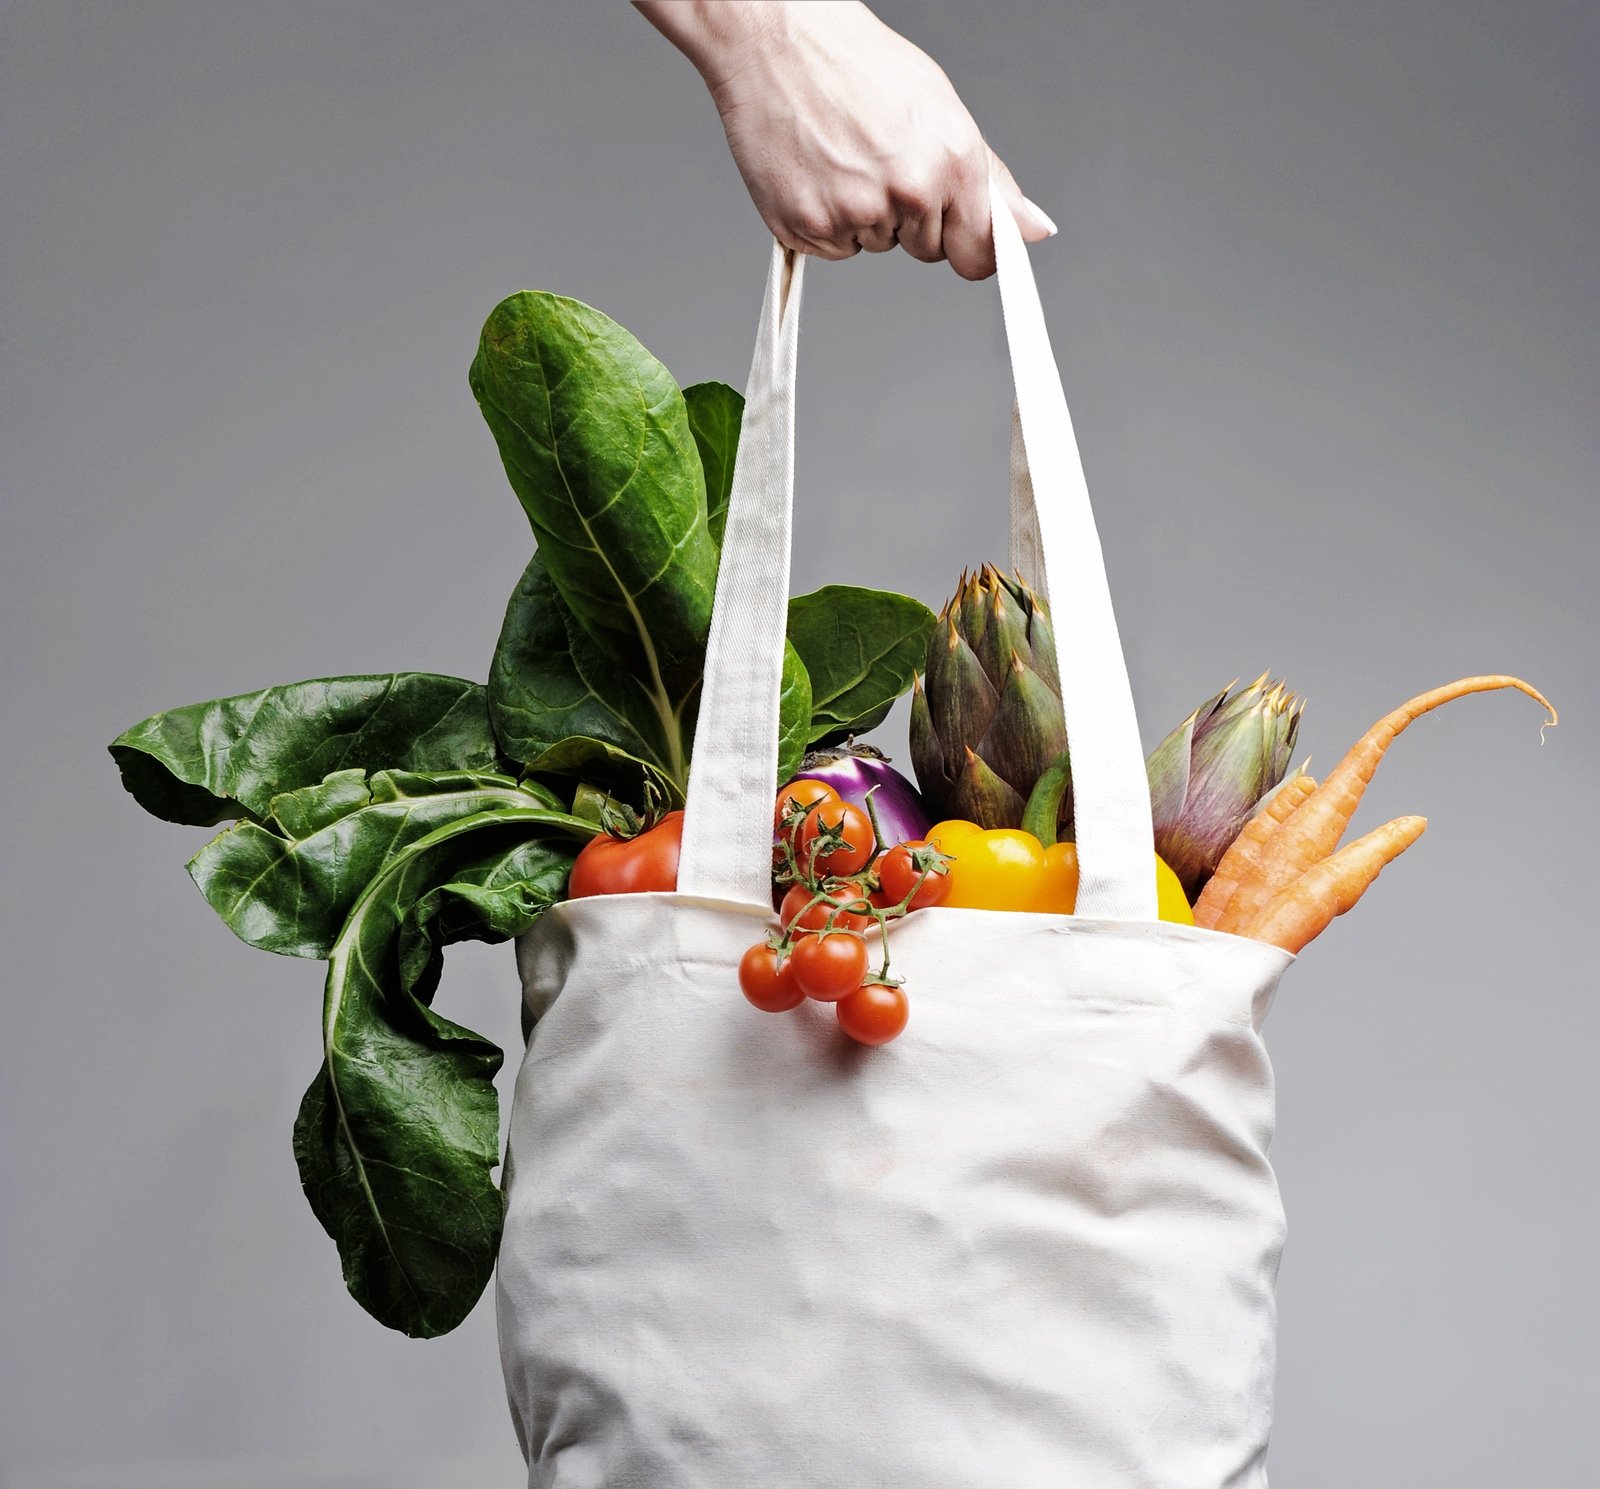 full of vegatables cotton shopping bag carried by a human hand